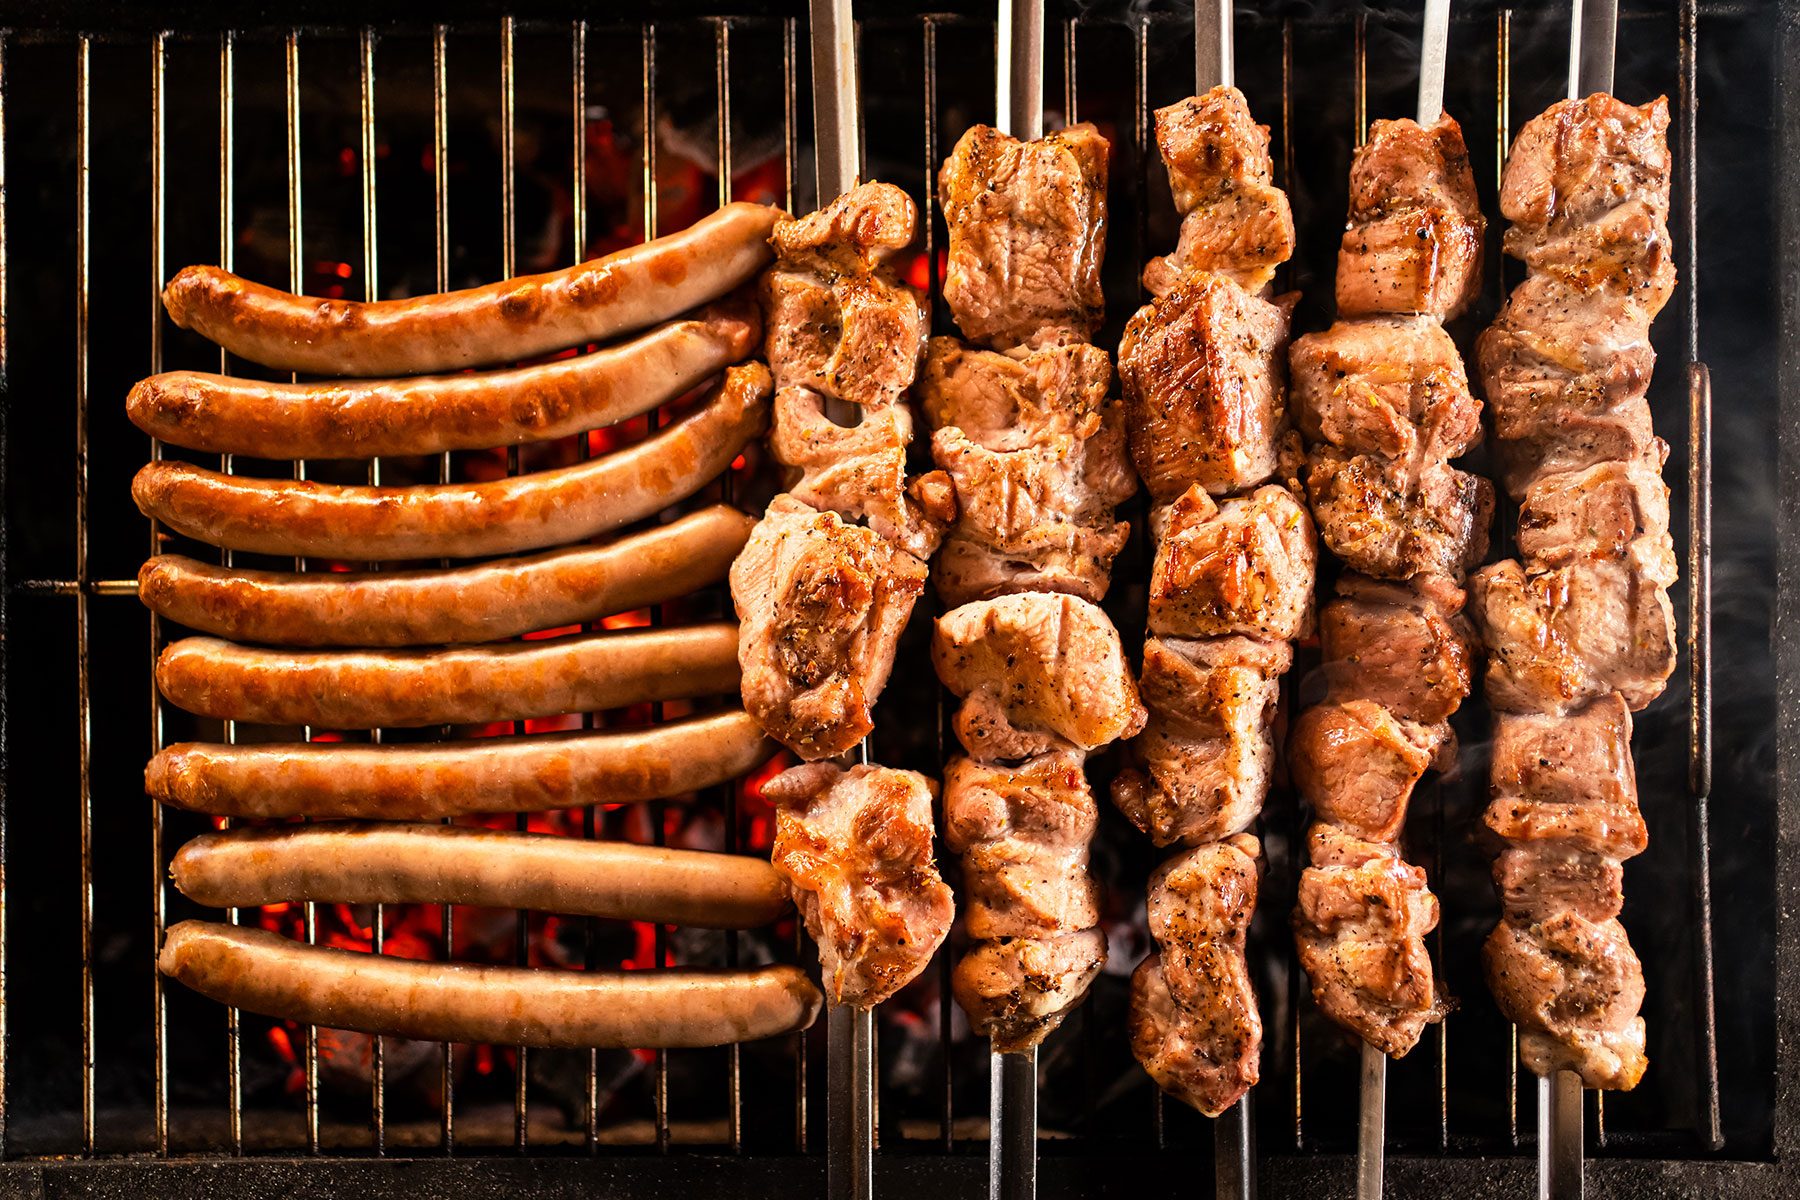 Meat On Skewers And Sausages Are Cooking On The Grill